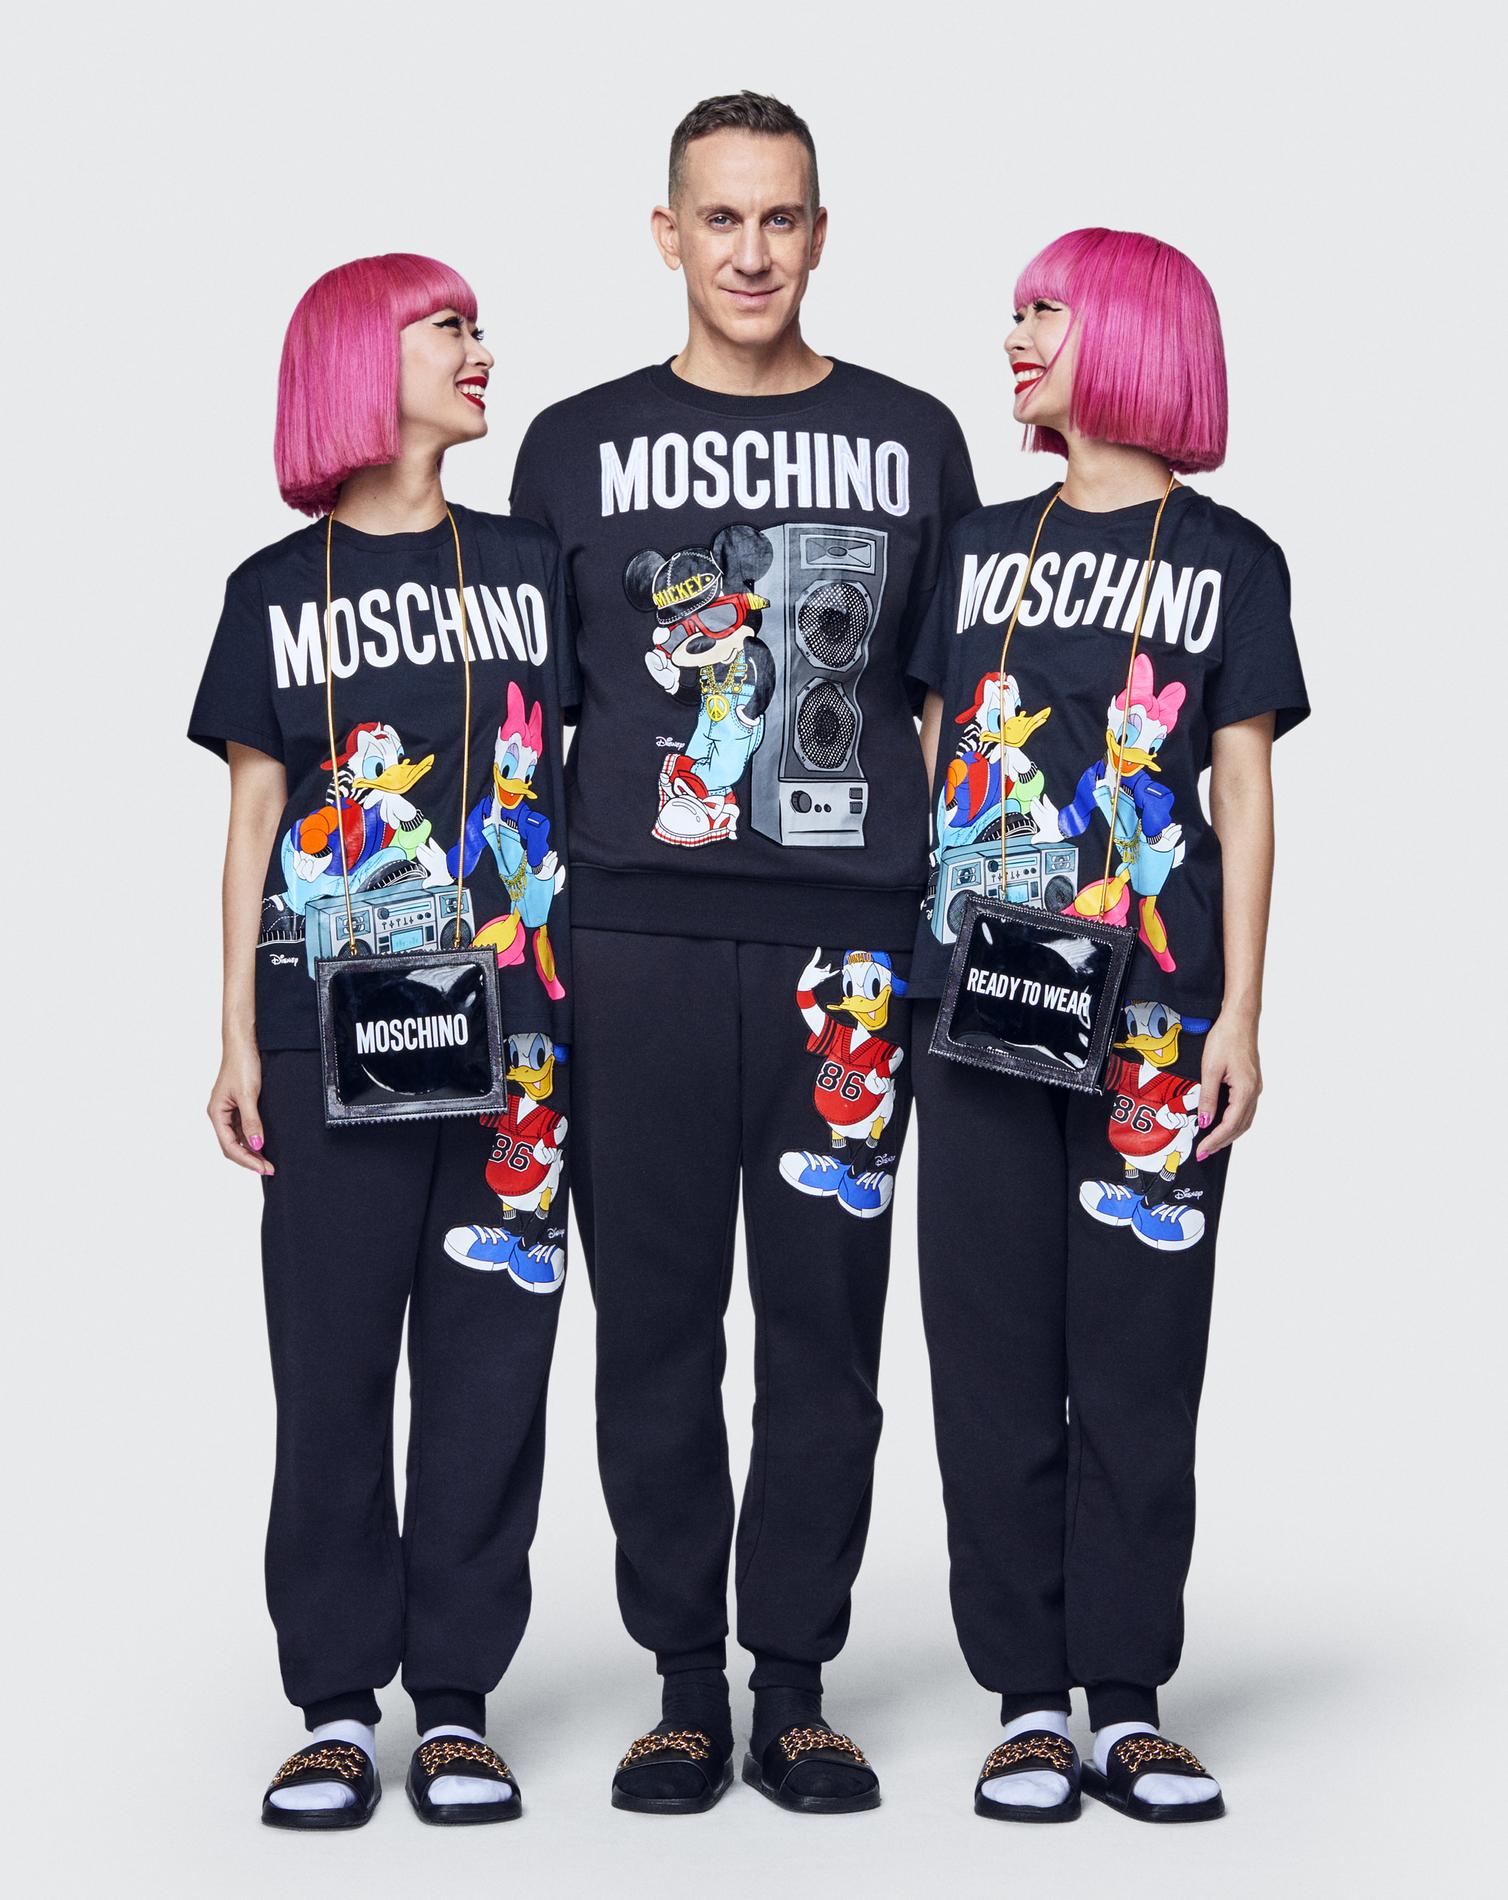 h&m moschino release